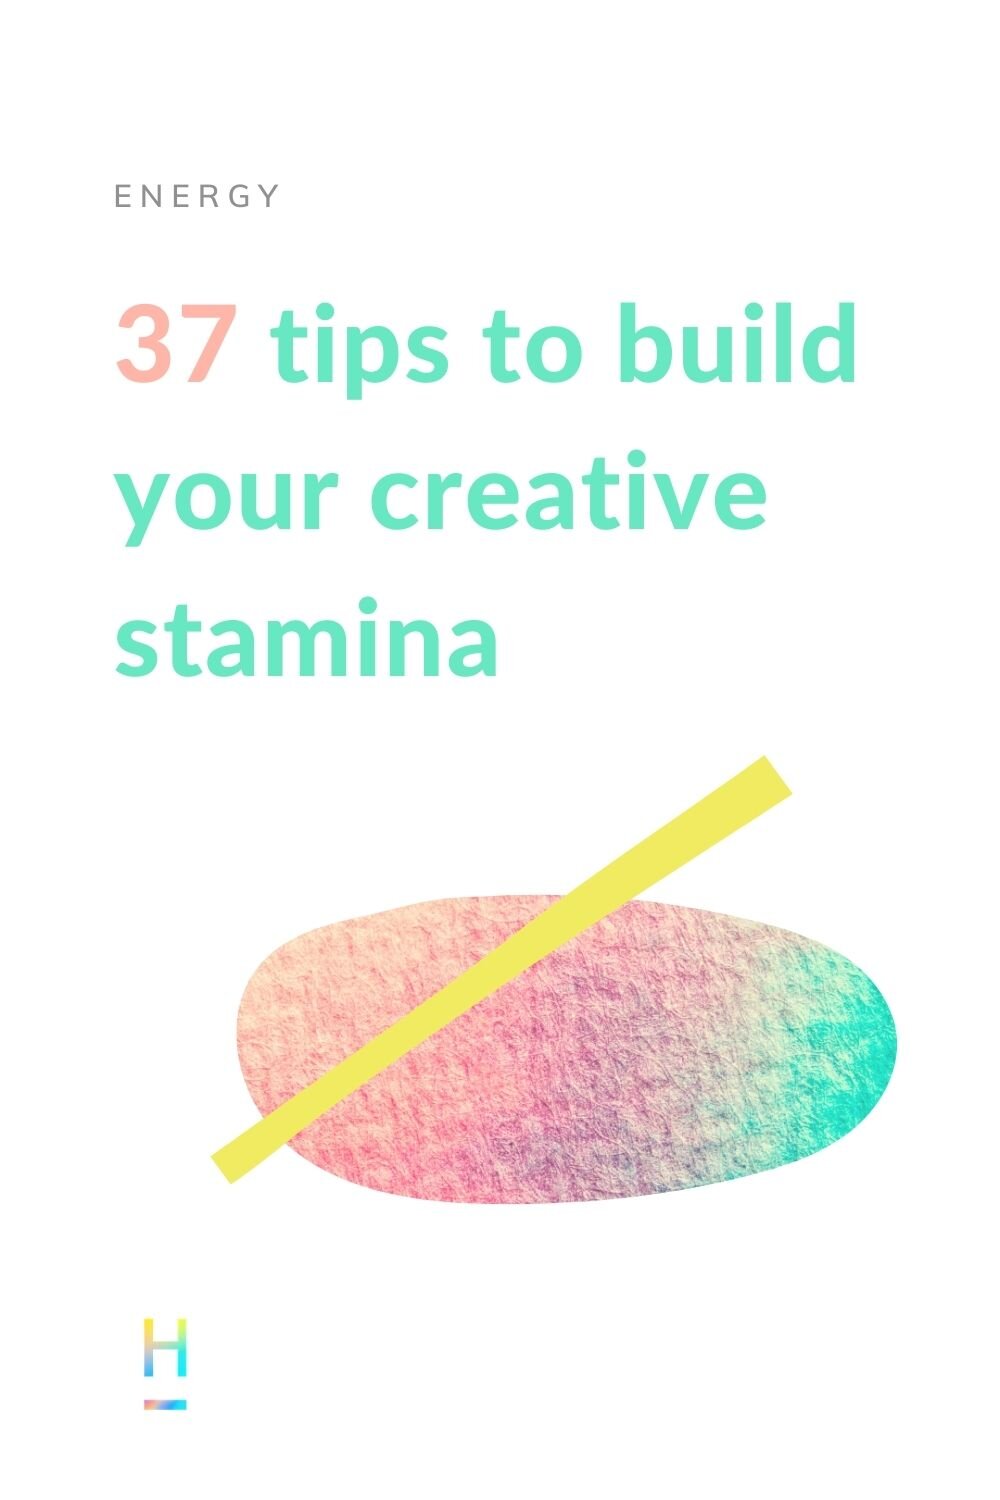 37 tips to build your creative stamina